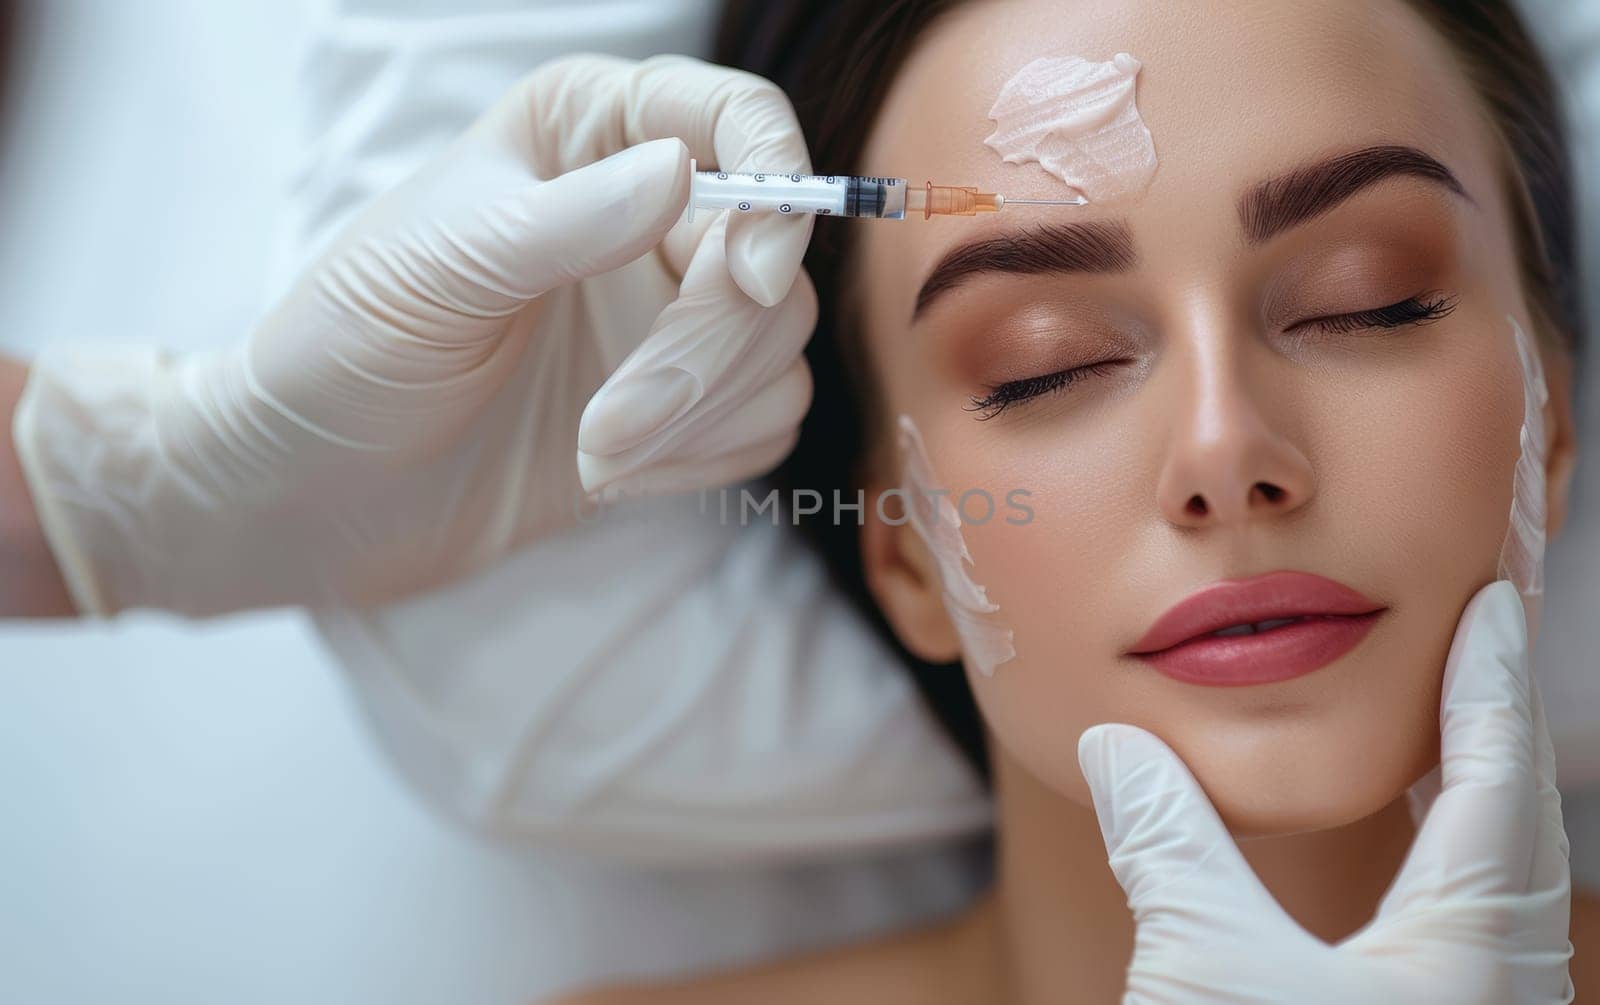 A tranquil woman undergoes a facial treatment, where cream is applied with a syringe, blending medical precision with skincare luxury. The image suggests a harmonious balance of health and beauty